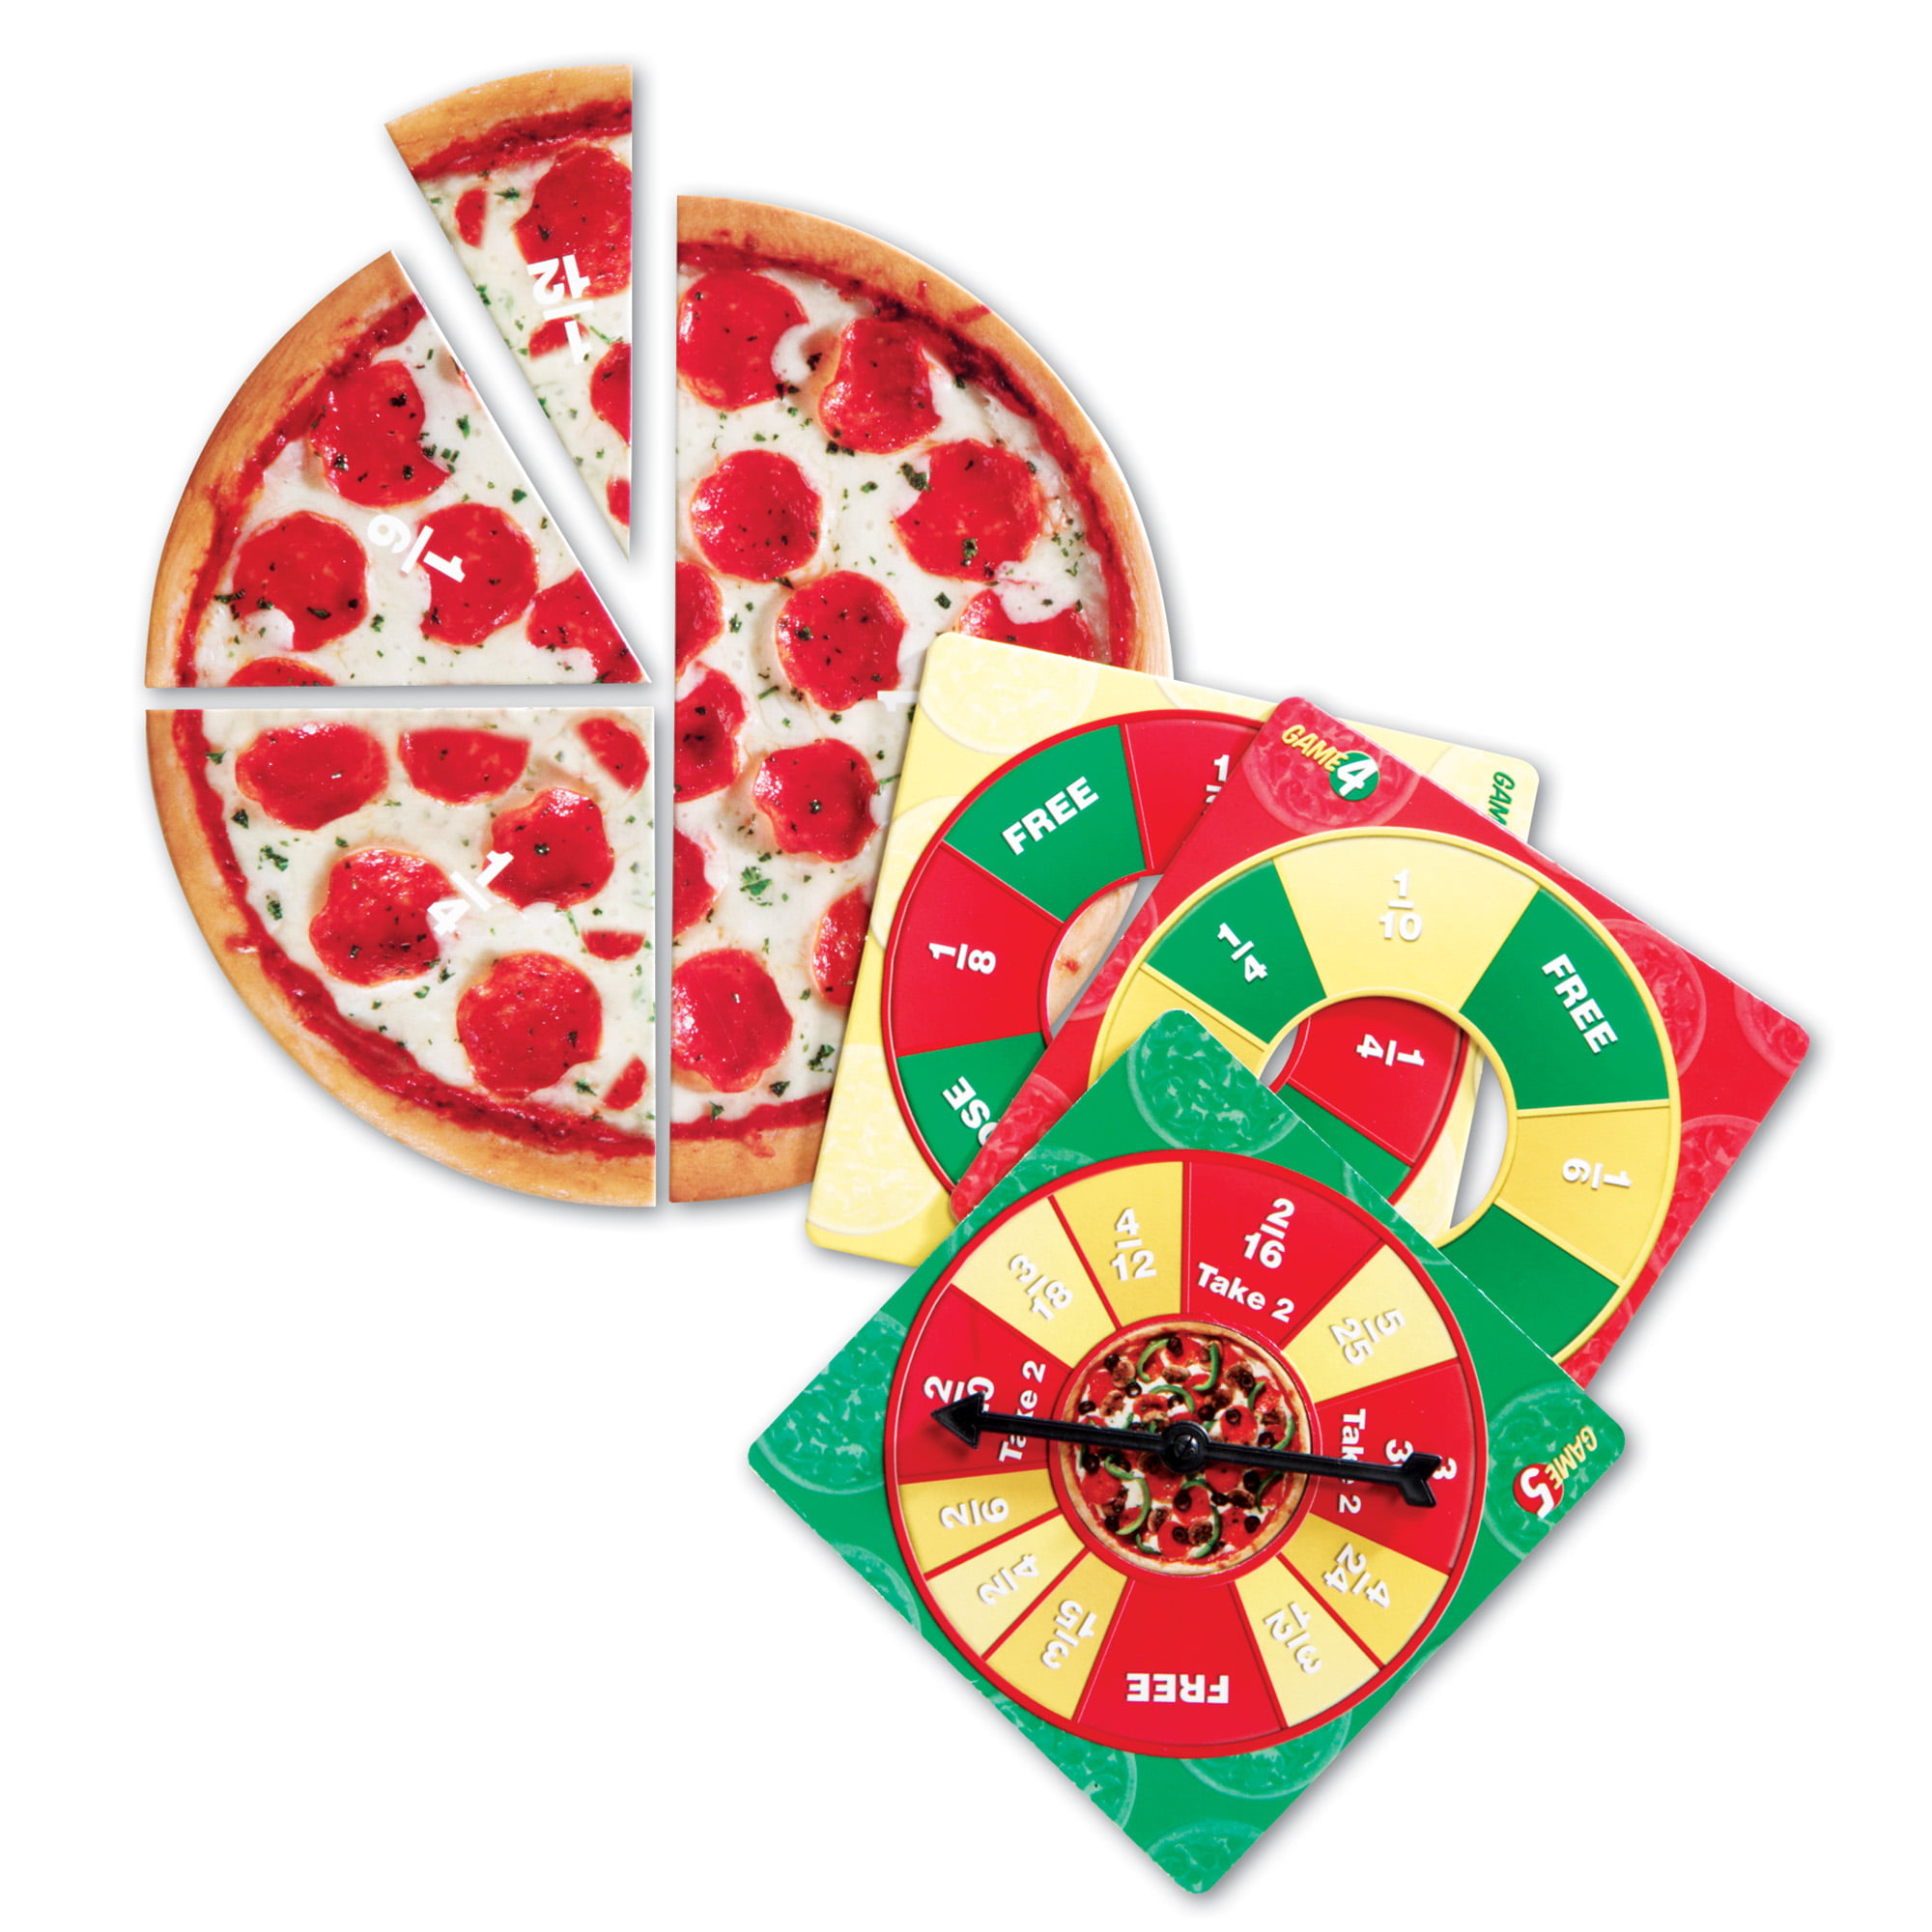 BNIB childrens maths game home school learning resource PIZZA FRACTION FUN 6yrs 